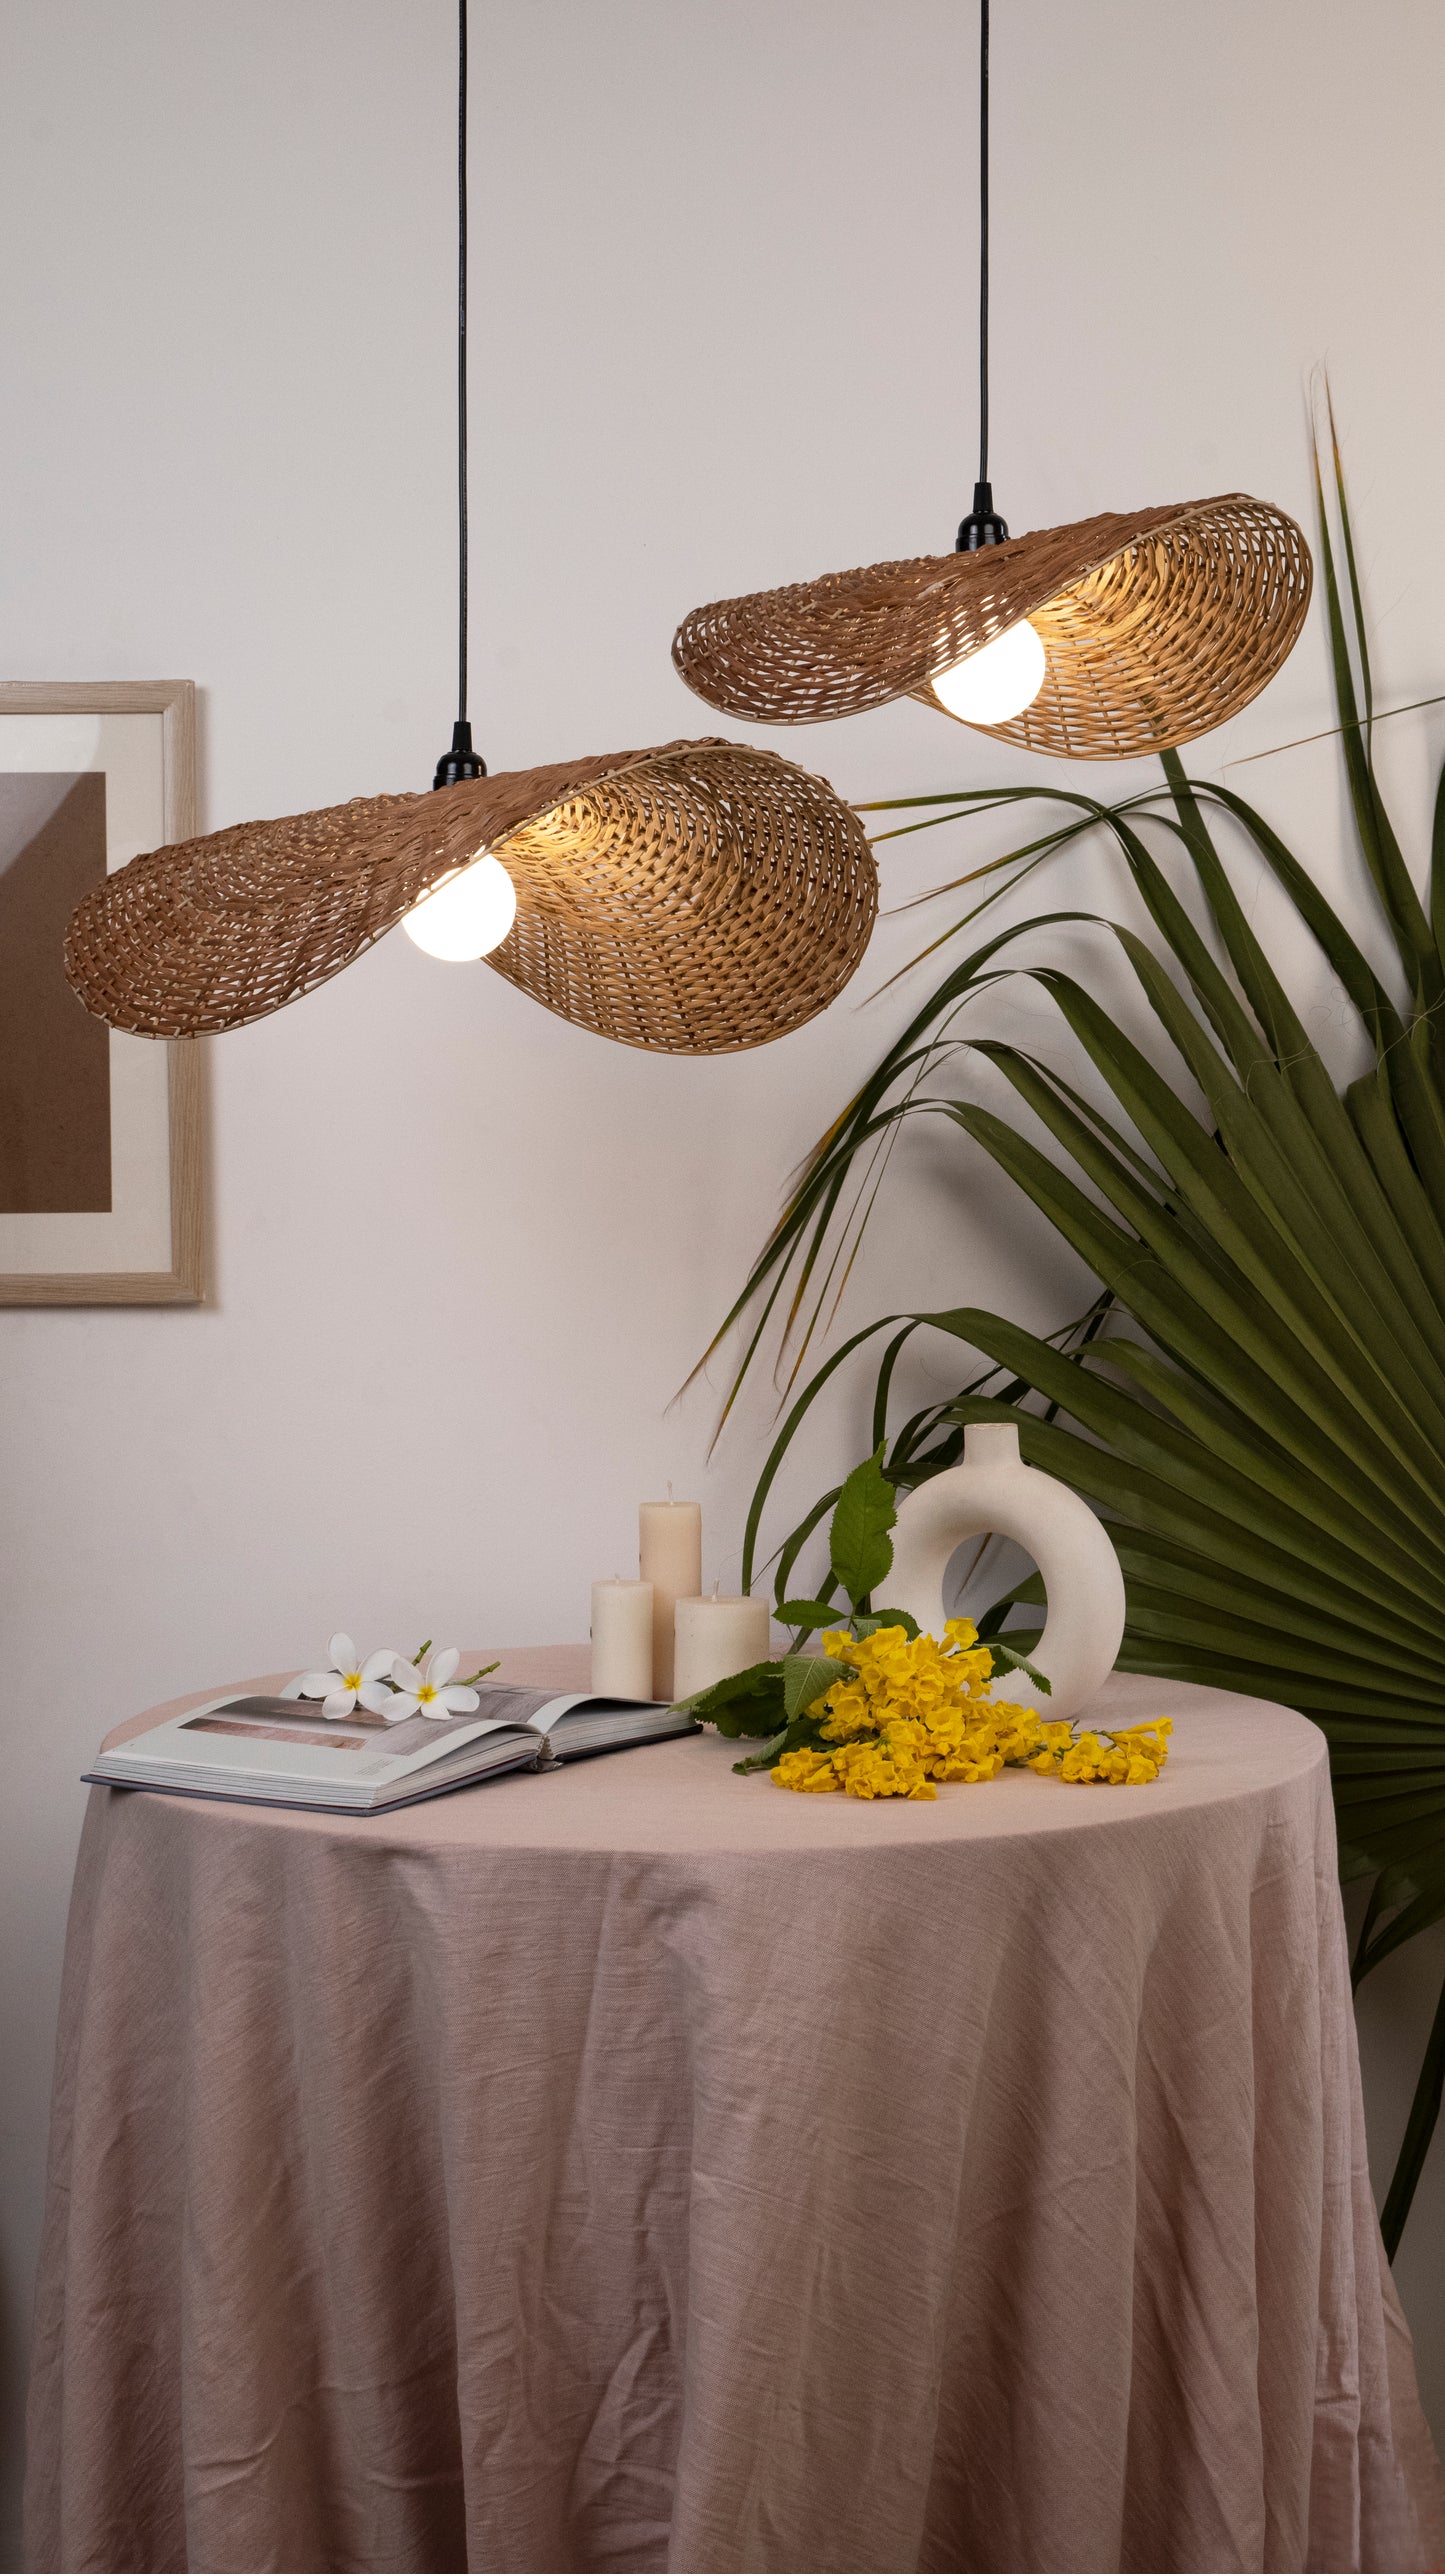 Ooas Lamp -Unique Willow Wicker Handmade Woven Hanging Pendant Lamp Home Cafe Restaurants Decor [Sizes - 600mm/450mm]